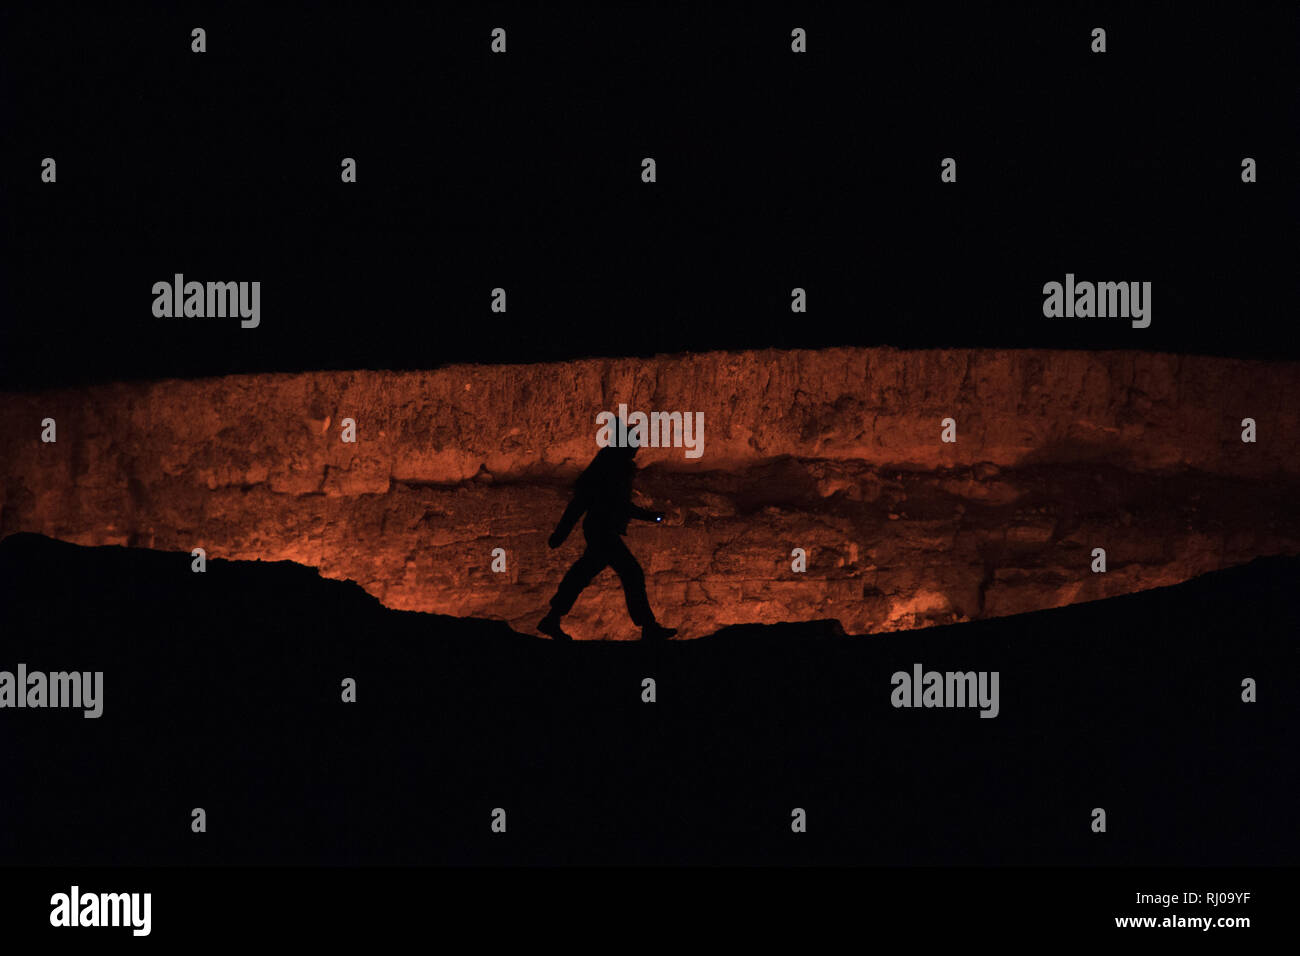 A person silhouetted walking along the rim of The Darvasa Crater, also known as the Doorway to Hell, the flaming gas crater in Turkmenistan Stock Photo